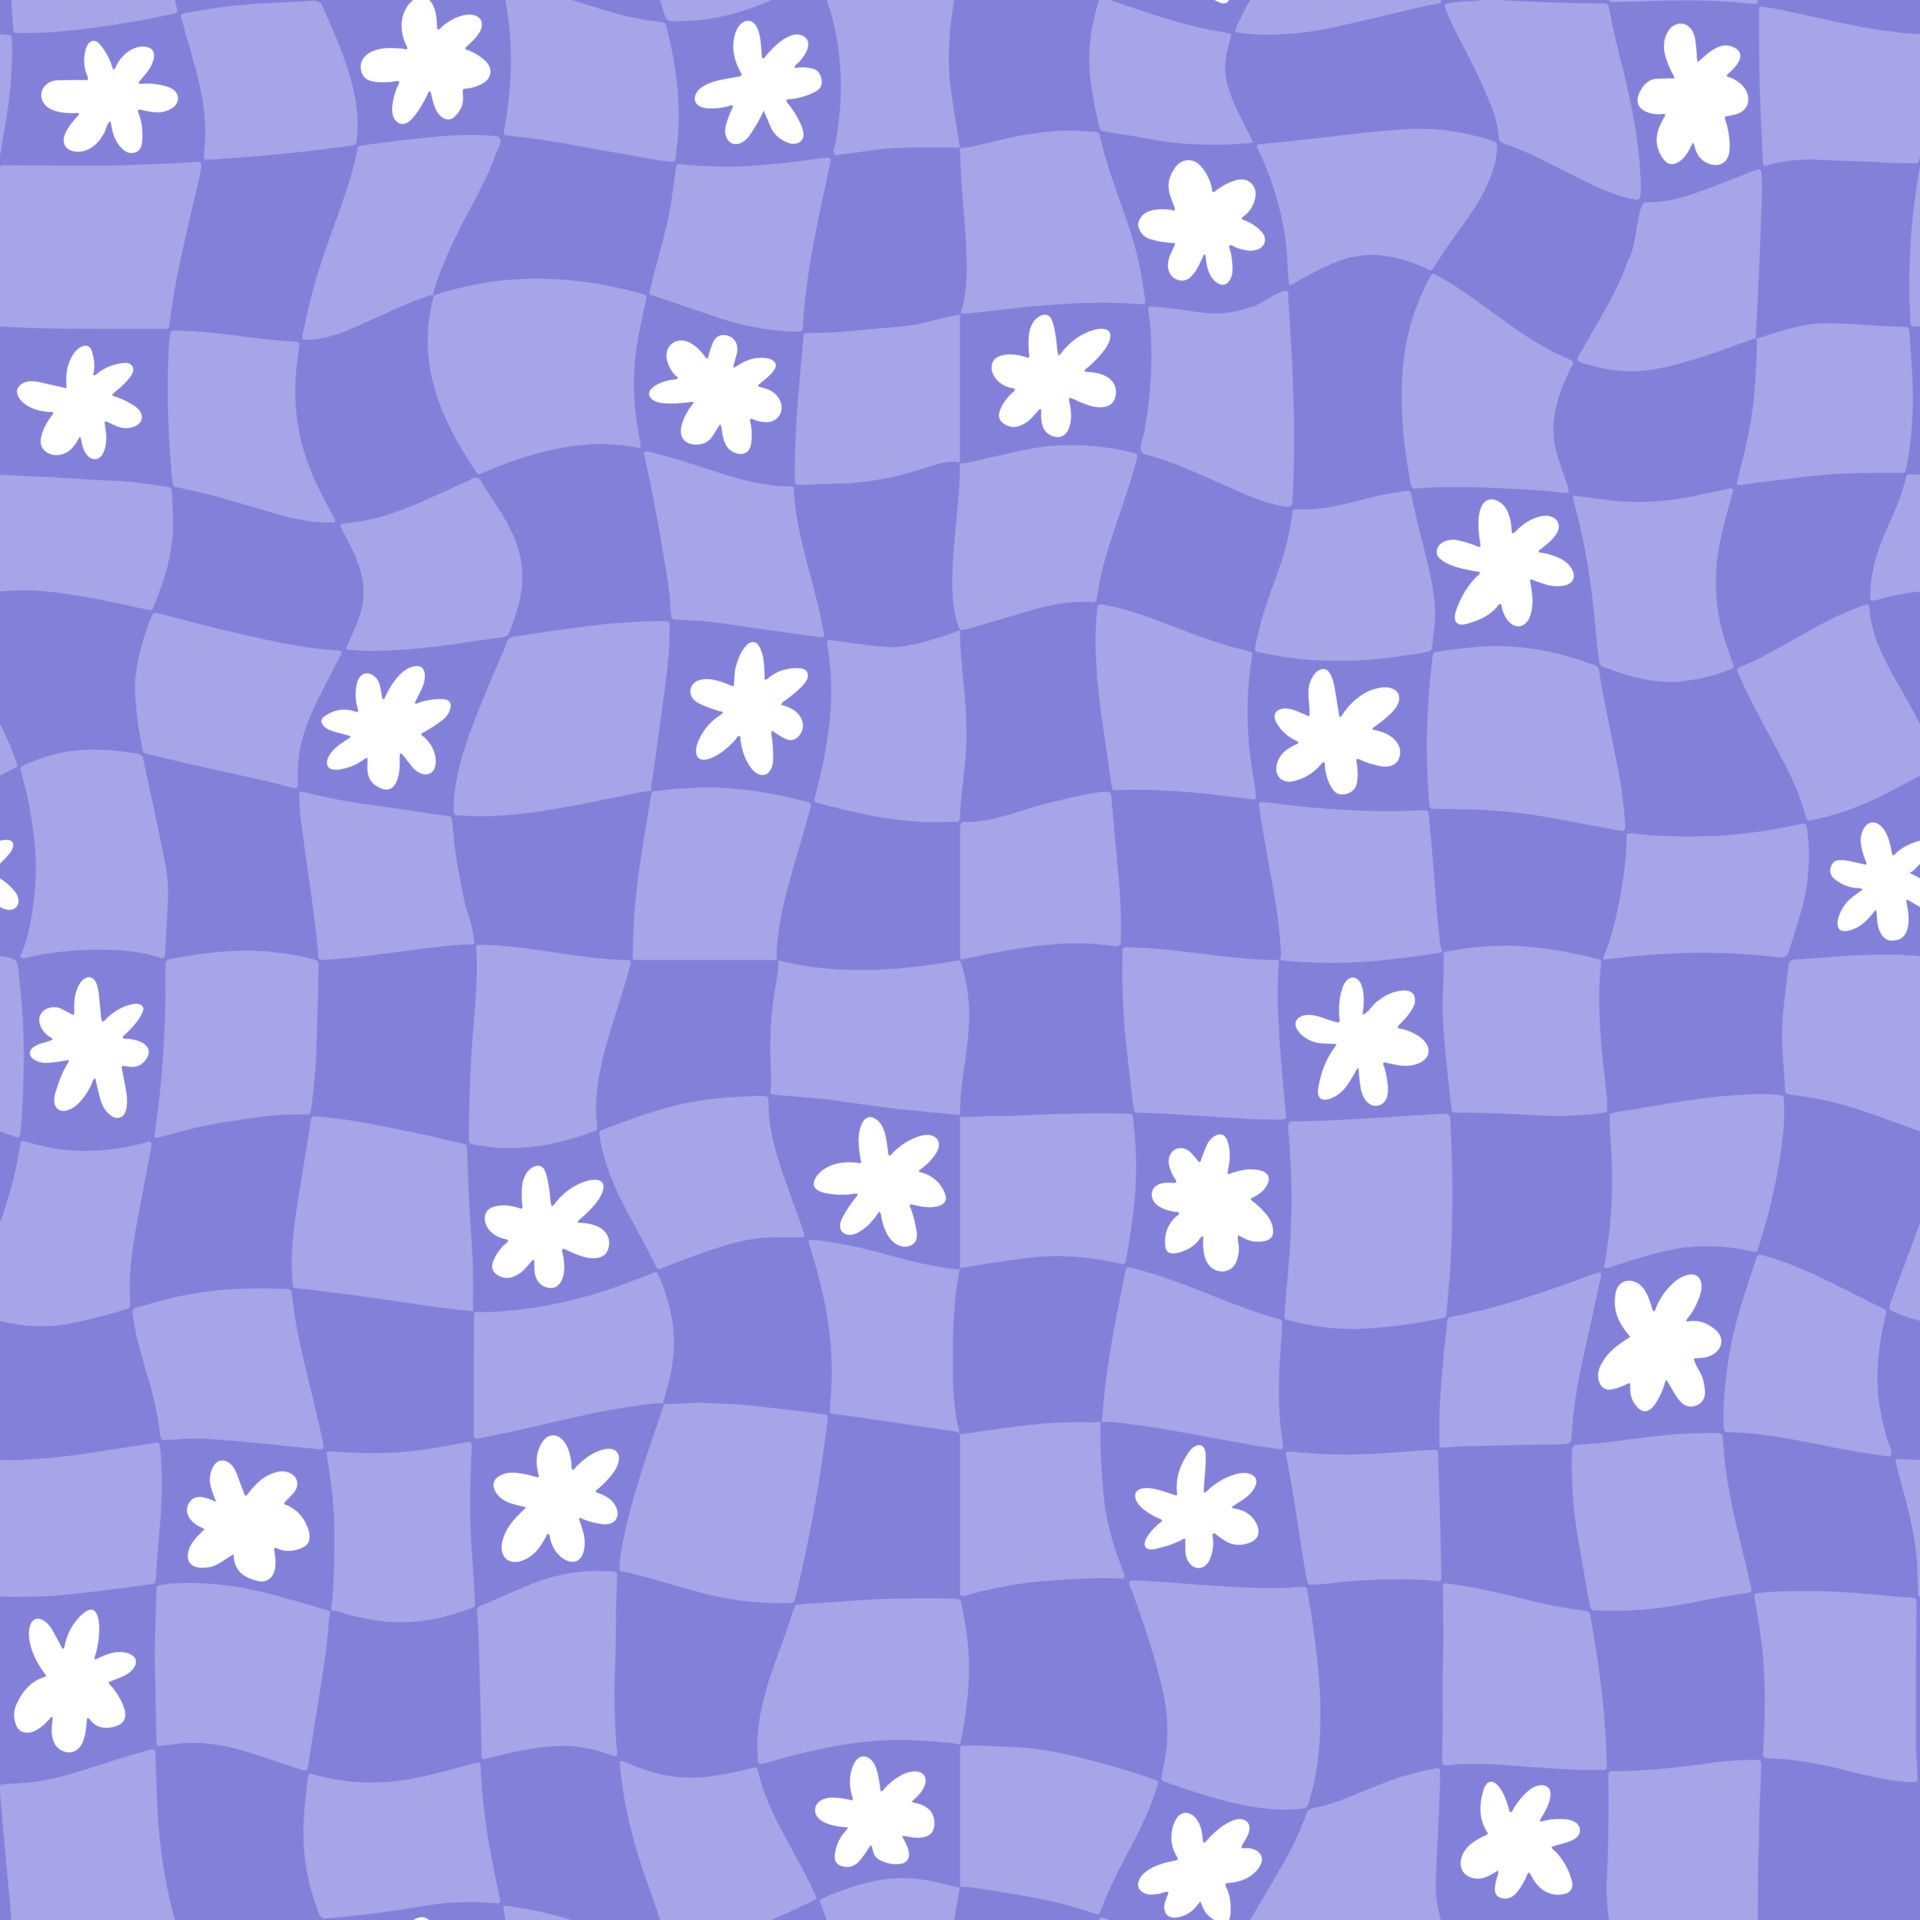 A repeating pattern of a purple and white grid with white flowers - Pattern, violet, grid